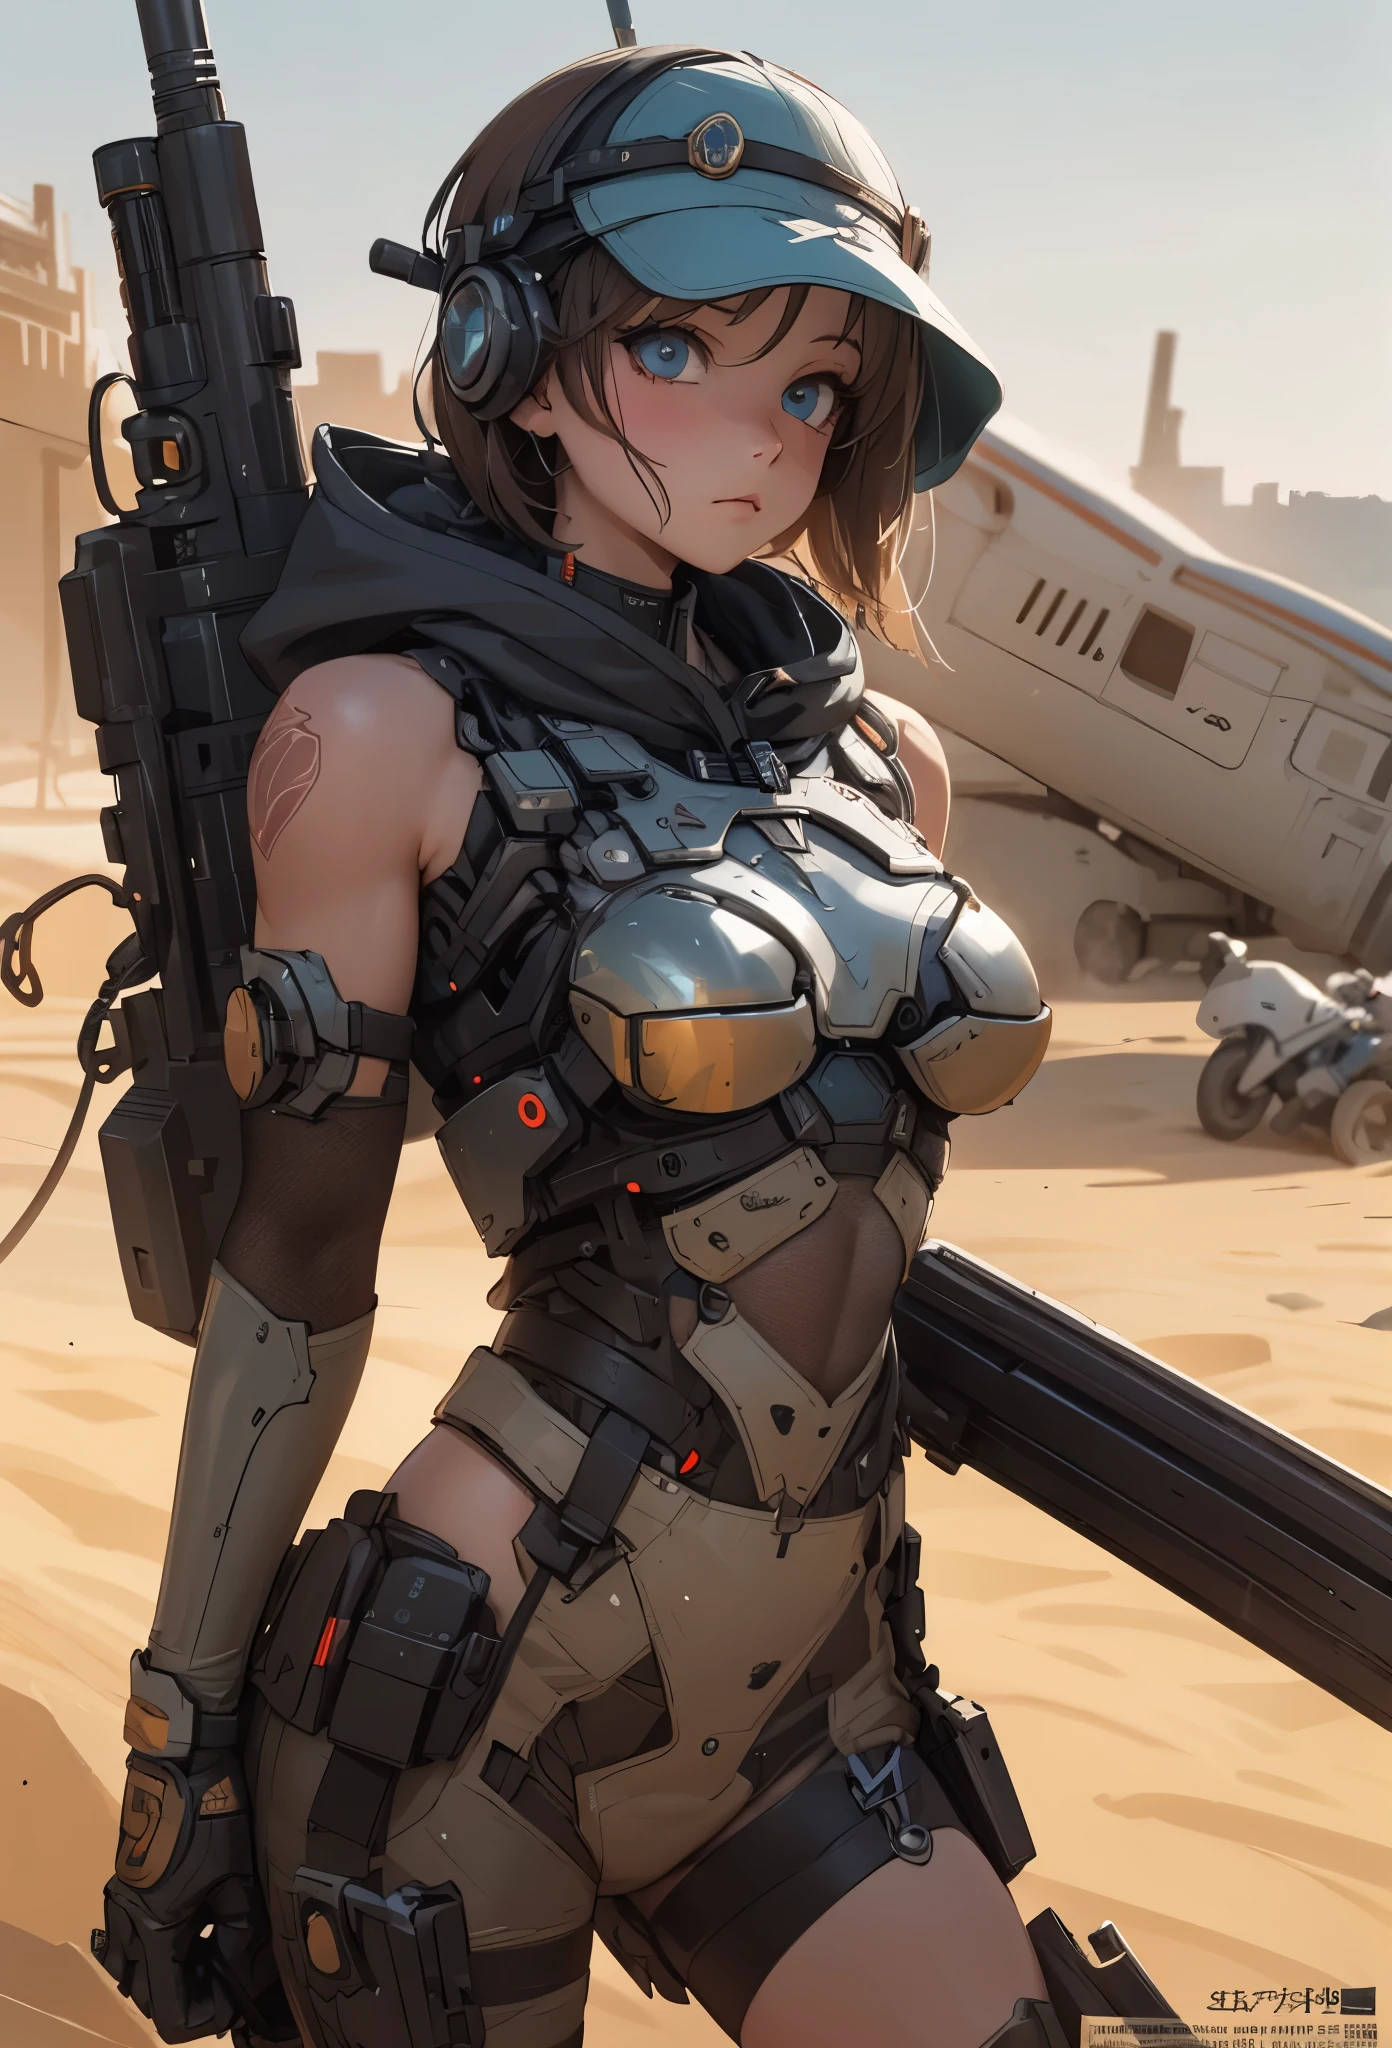 ((Highly accurate drawing in every detail)Extremely precise depiction)[High resolution],(detailed illustrations,Very fine and detailed drawing,Delicate drawn lines with tempo,Realistic texture expression),[color traced main line],(Martian battlefield [Desert Ruins]),[独奏],hentai ((アニメ) BIONICGirl) Beauty (14 years old))((muscular)) [SKINNY],cyborg [MACHINEARMY Mobile Infantry Military],Bullet belt [Hood cloak [Brute knife]] [Heavy Mace [javelin]] [[Shells Mortars Grenades]],gravure [[cat fight]] Battle Damage,[retro future],(intricate and beautiful decoration [Dense detail]),(Fine and beautiful skin expression [transparency]),Precisely drawn eyes[Perfect eyes detailed(Iris drawn in minute detail)(Beautiful eyes like jewels)],[eyes light[Pinpoint lighting for the eyes]],[long and beautiful eyelashes],[precisely drawn hair [Beautiful and lustrous hair detailed]],(Perfectly hand detailed [Beautiful fingers with no damage [beautiful nails]]),(perfect anatomy(perfectly balanced proportions))[[full body portrait]],[[Design built to the highest level]][ideal color coordination(Accurate simulation of light and material interactions)],([Precision Detail](detailed,高fine)),[Visual art that tells a story],((highest quality)fine[[High density drawing]])(4K Quality).